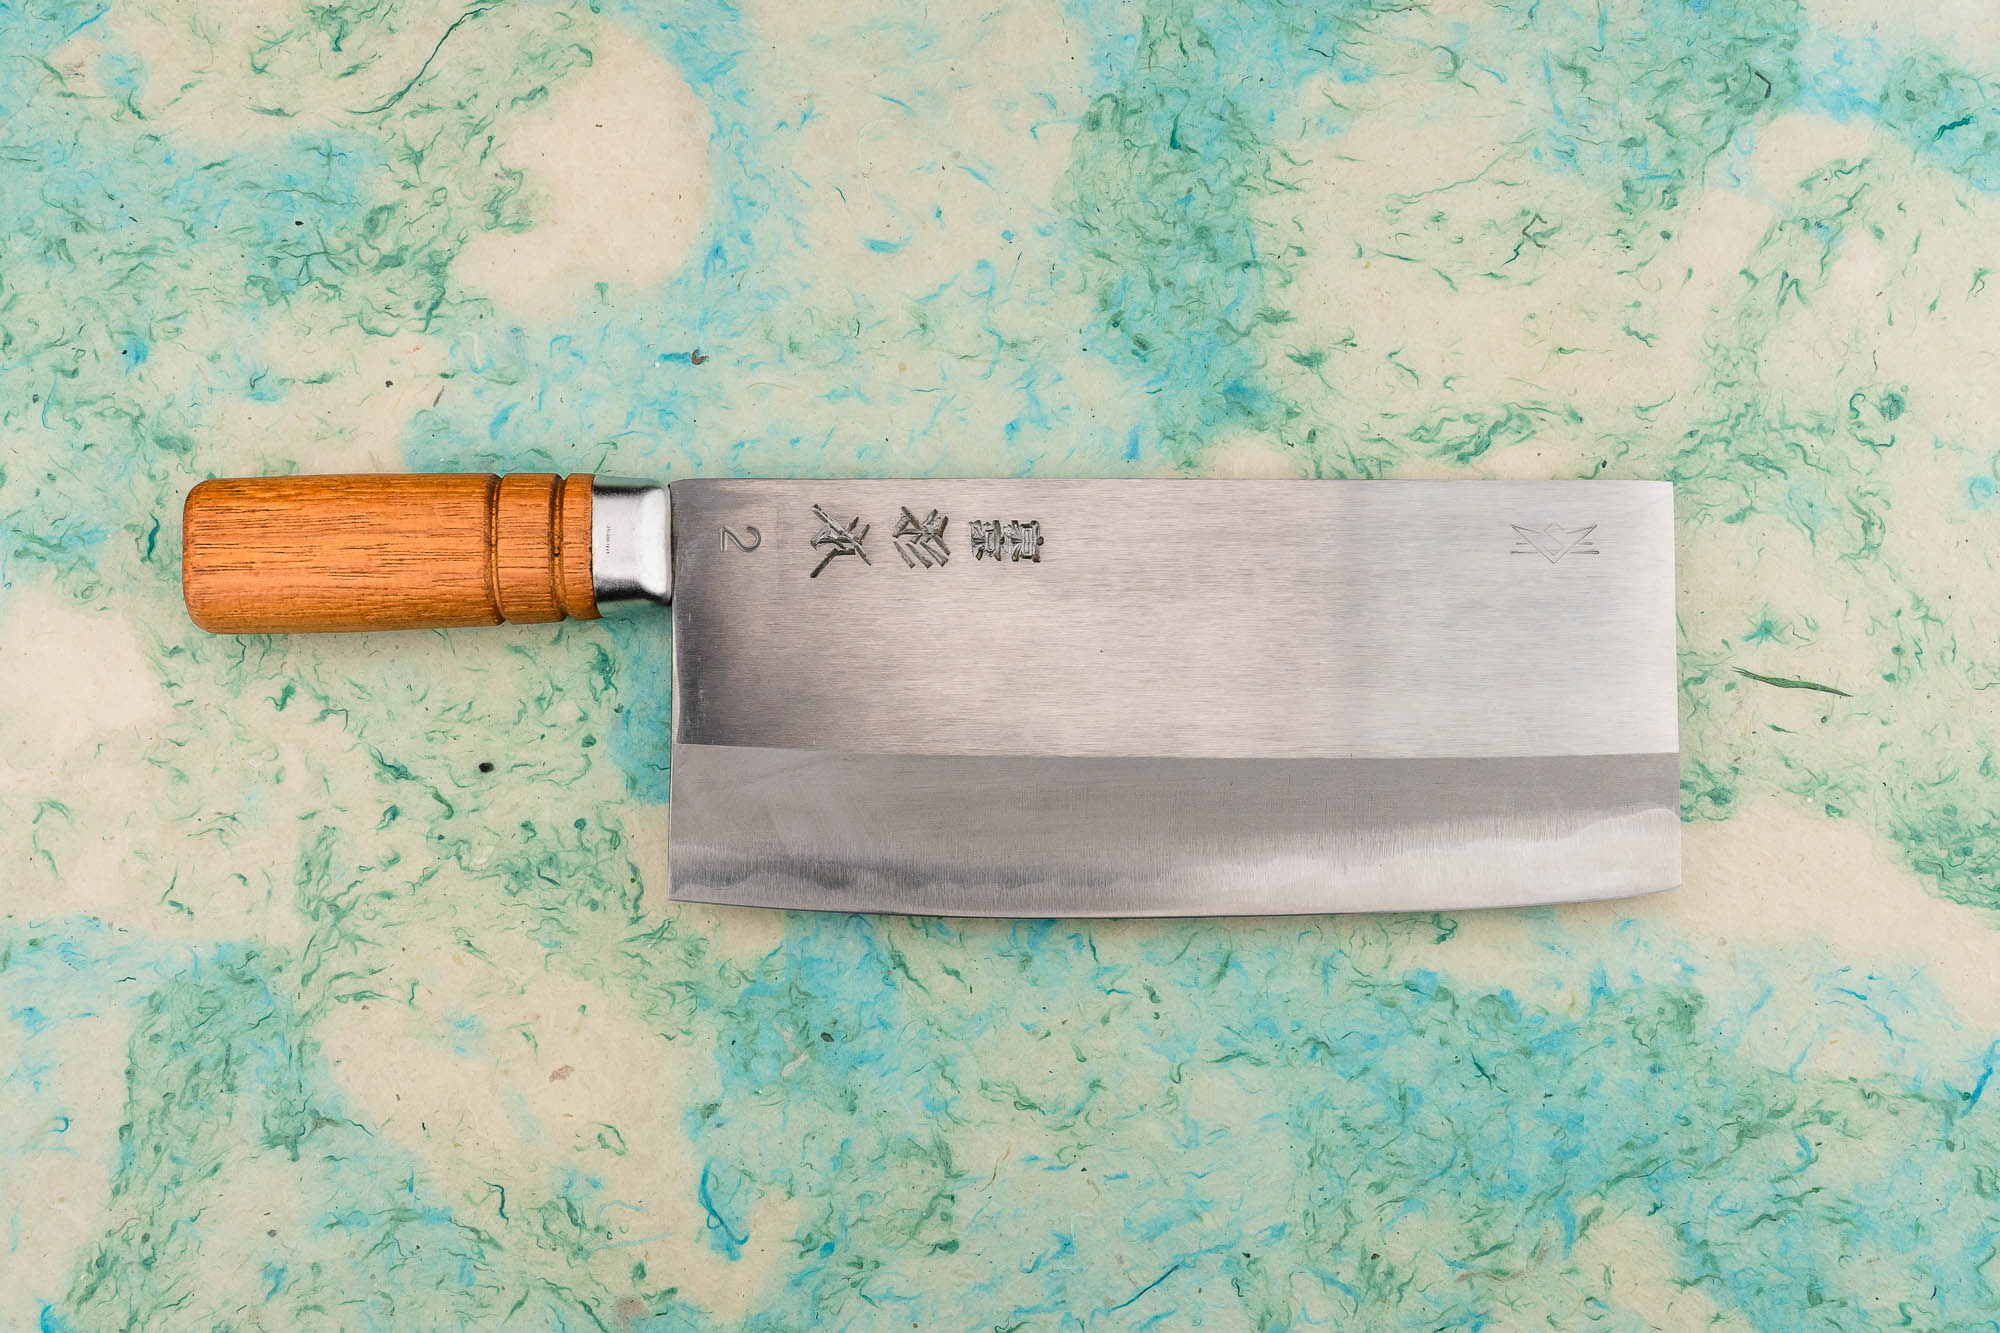 Sugimoto No.2 Chinese Cleaver 220mm